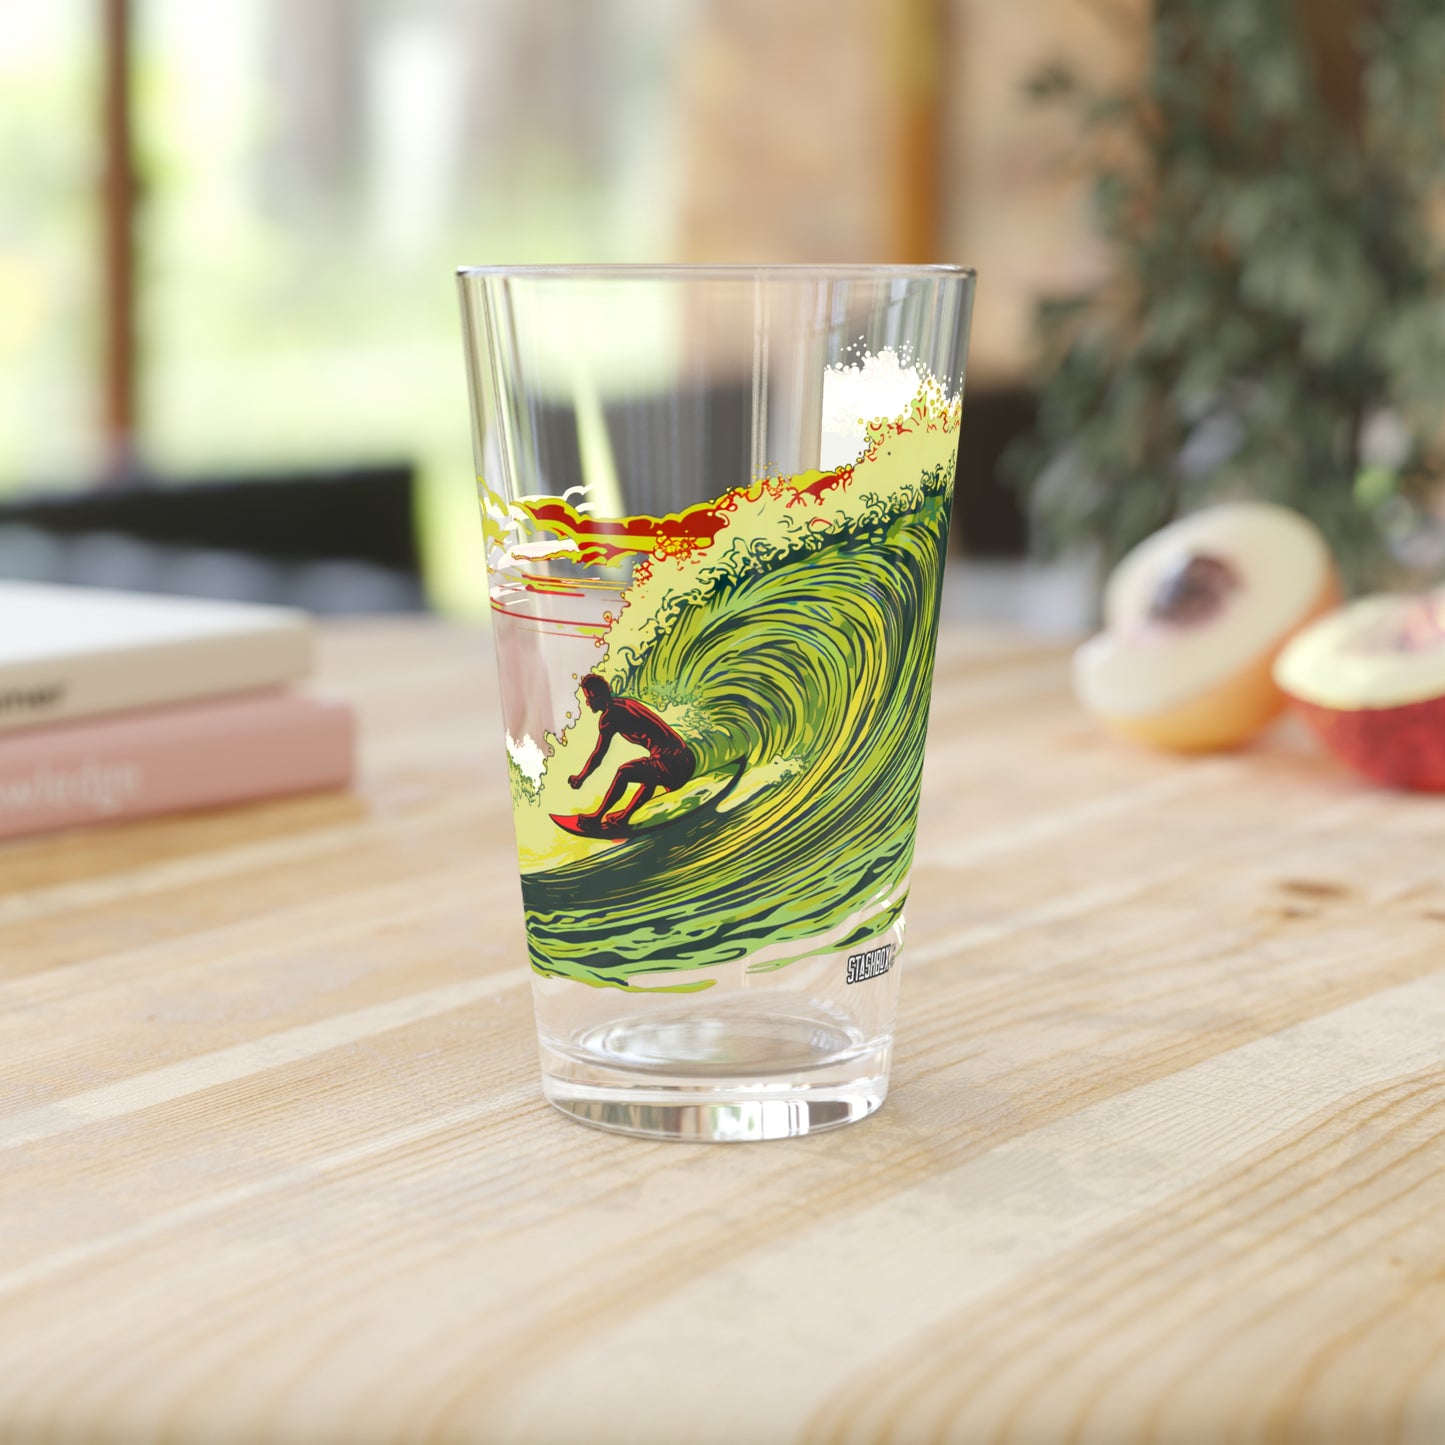 Ride the Hawaiian wave of style with our Surfing Wave Art Pint Glass. Exclusively produced by Stashbox.ai, this 16oz glass boasts striking green, yellow, and red waves, bringing the Aloha spirit to your drinkware collection. Cheers to tropical vibes!